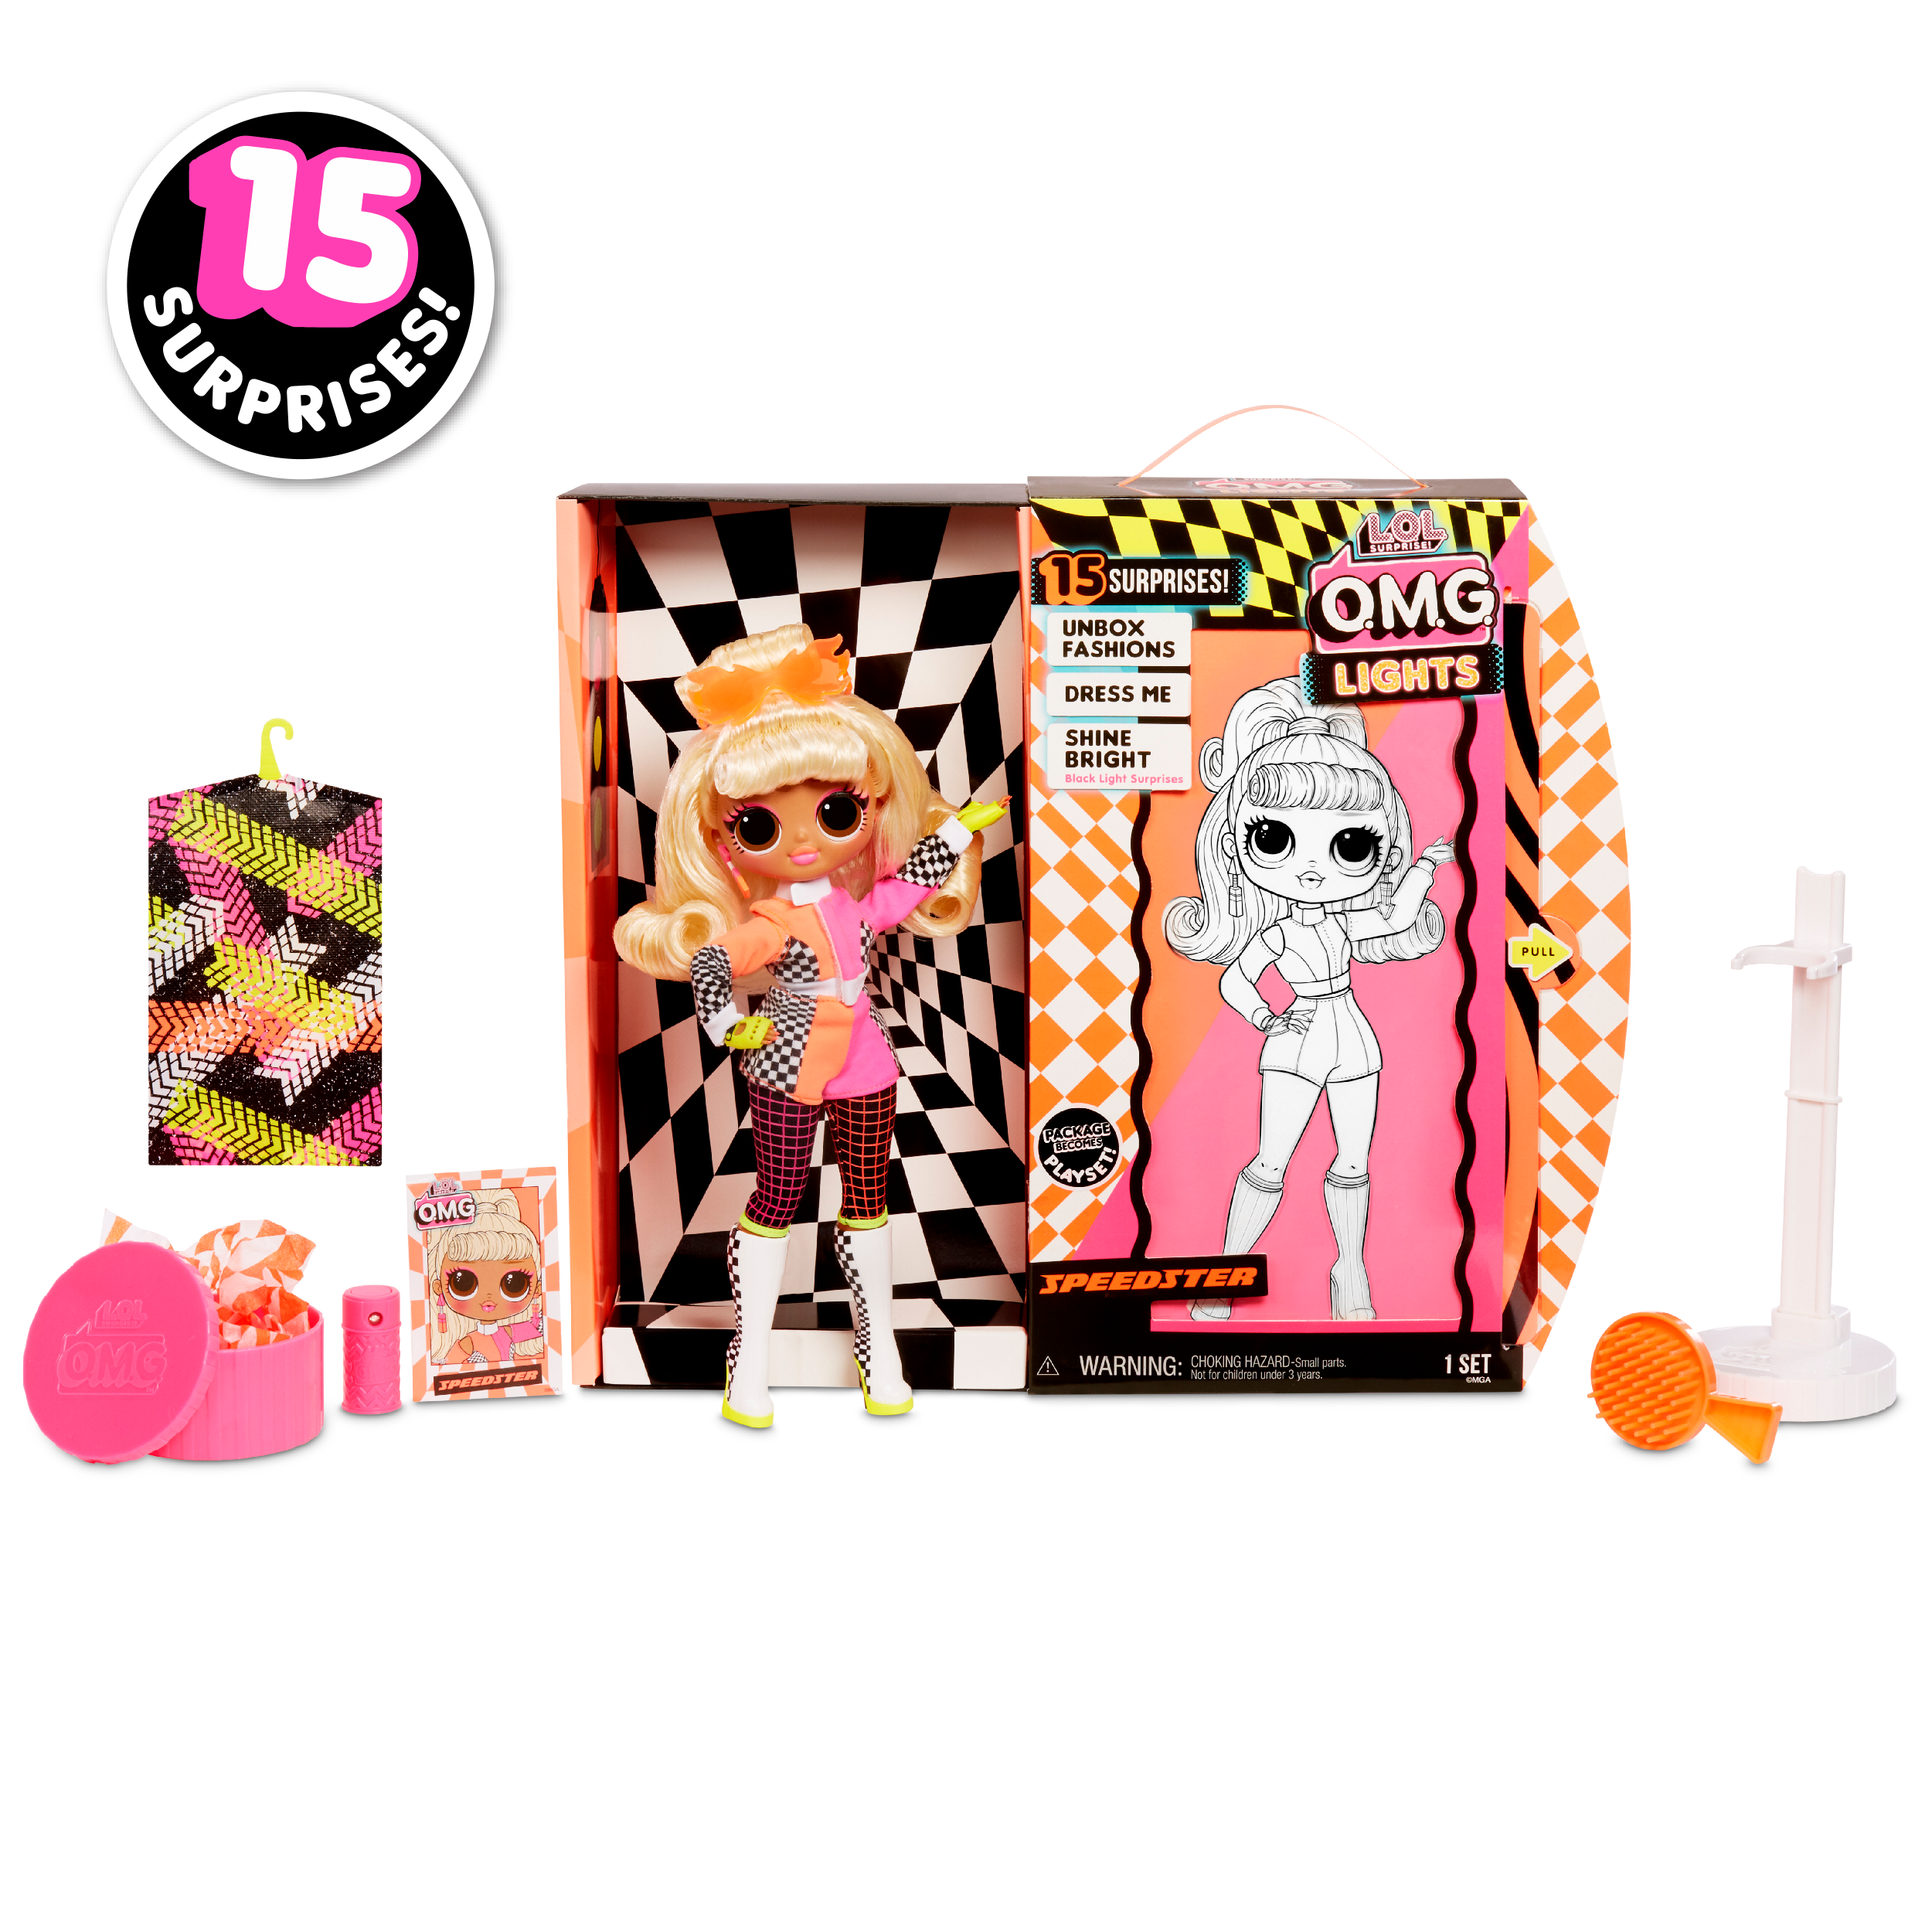 LOL Surprise OMG Lights Speedster Fashion Doll With 15 Surprises, Great Gift for Kids Ages 4 5 6+ - image 3 of 7